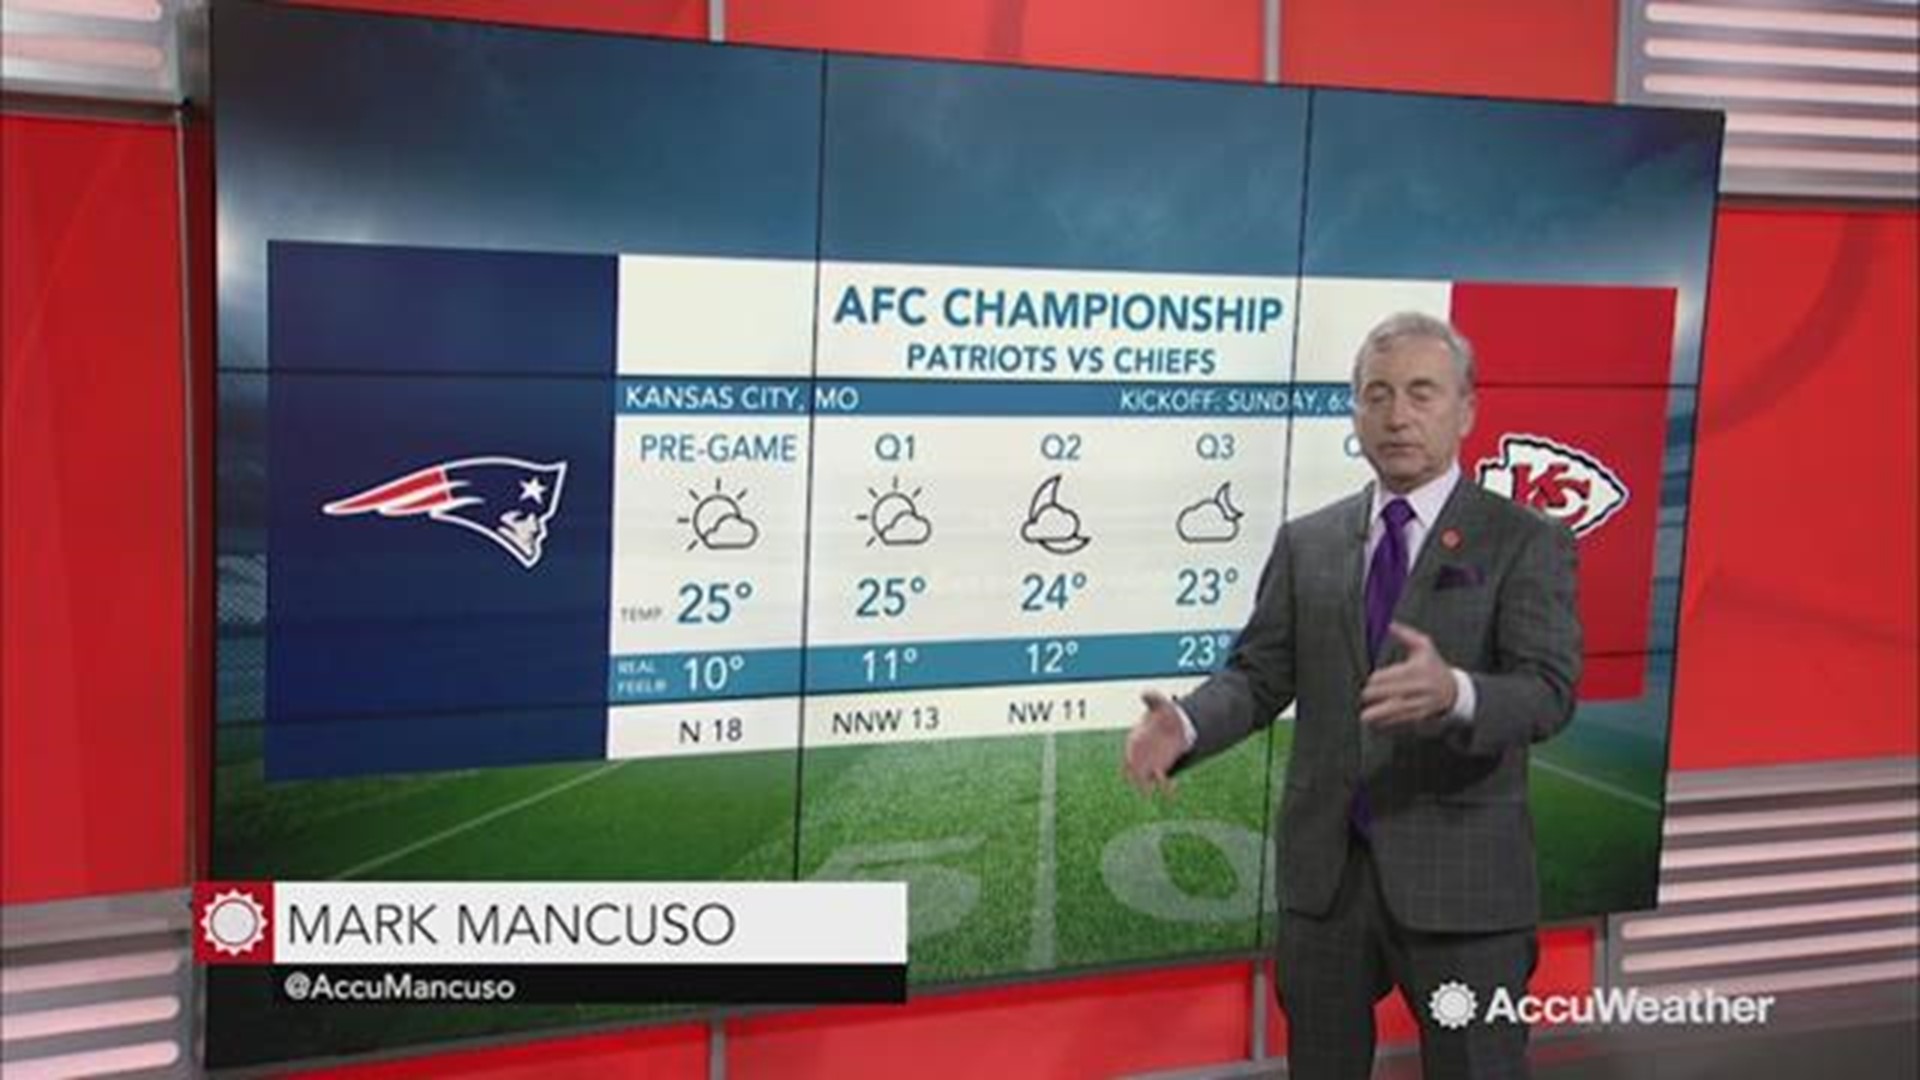 With Pats traveling to Kansas City, temperatures will start in the mid-20's. Cold, snow and rain can make or break a football game, but what about the fans who brave all kinds of weather to cheer on their favorite teams? Accuweather takes a look inside th